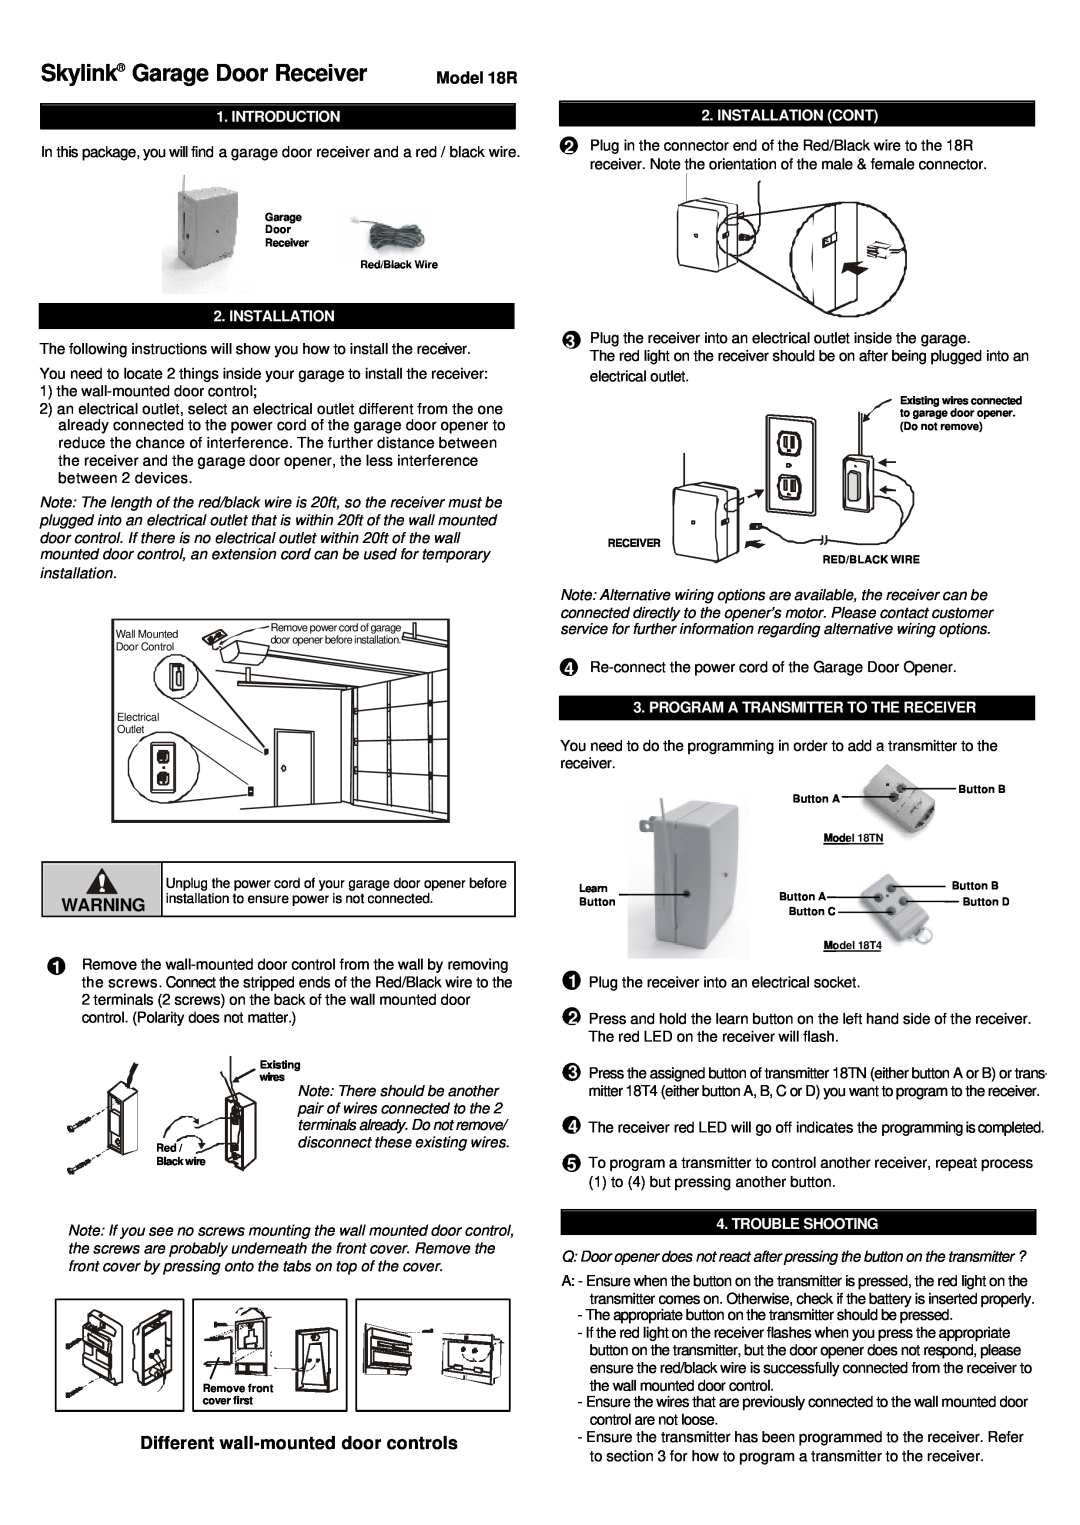 SkyLink manual Introduction, Installation Cont, Program A Transmitter To The Receiver, Trouble Shooting, Model 18R 